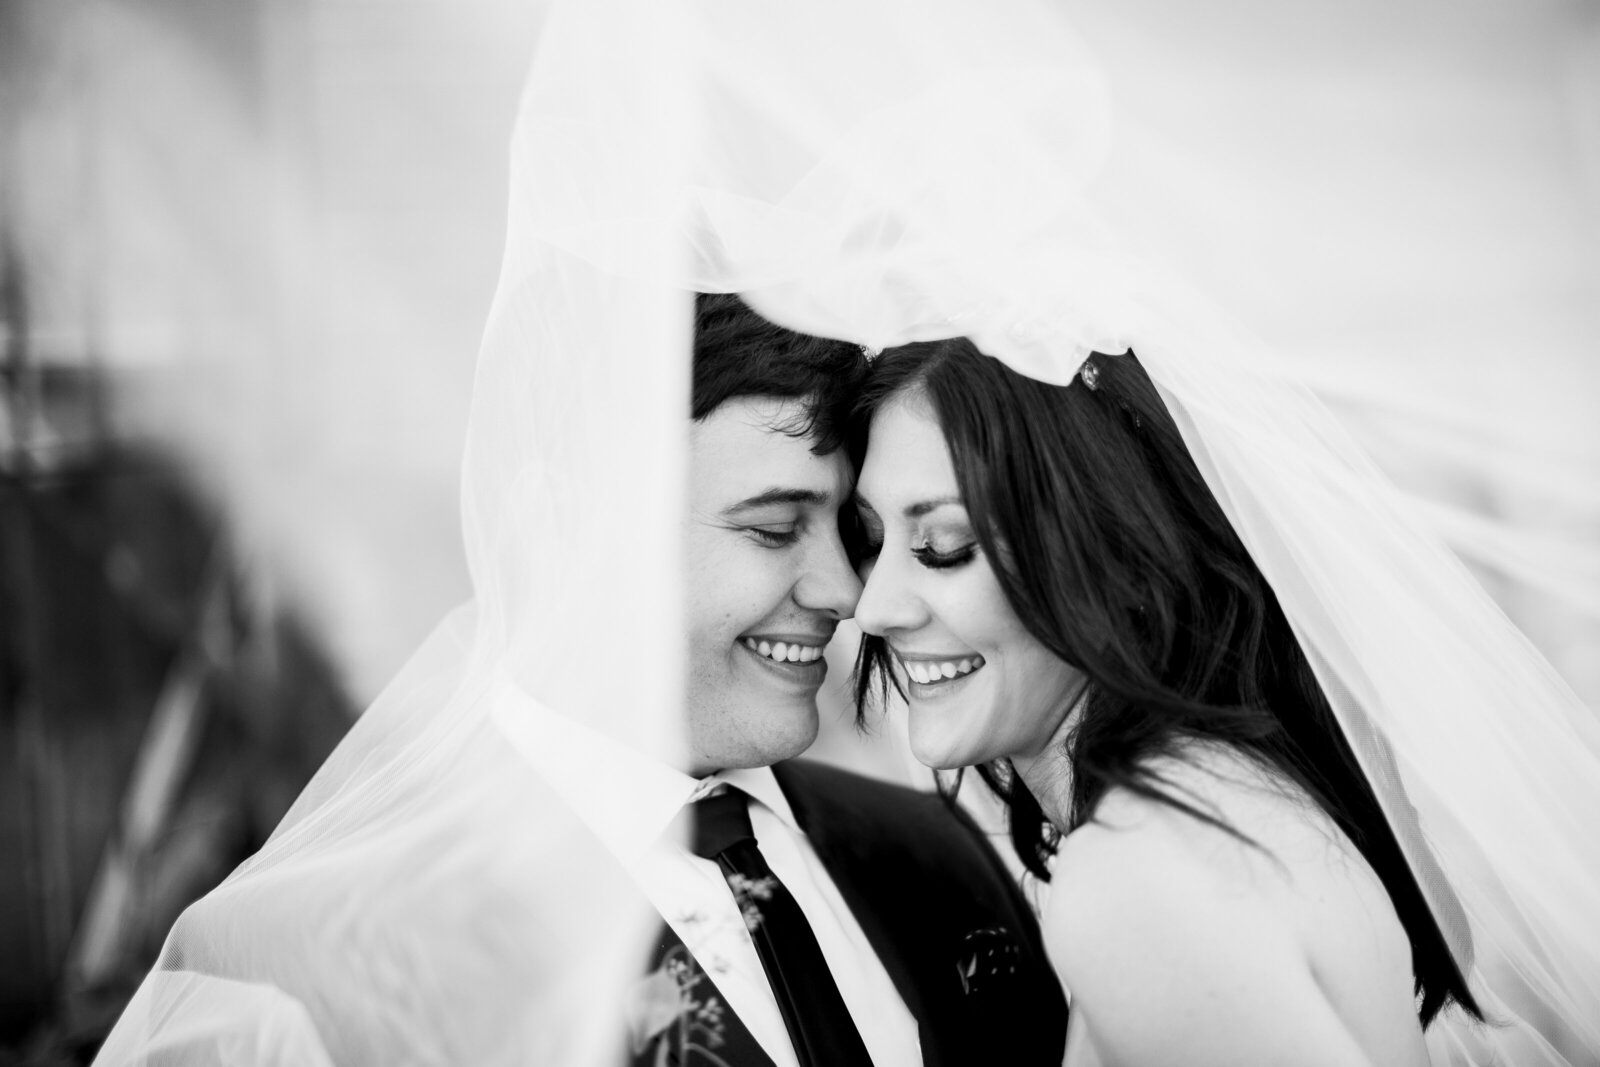 Black and white photo of a bride and groom smiling closely to each under while enveloped by the bride's veil. The bride is on the right and is wearing a white dress. The groom is on the left and is wearing a dark suit. Both are smiling with closed eyes.